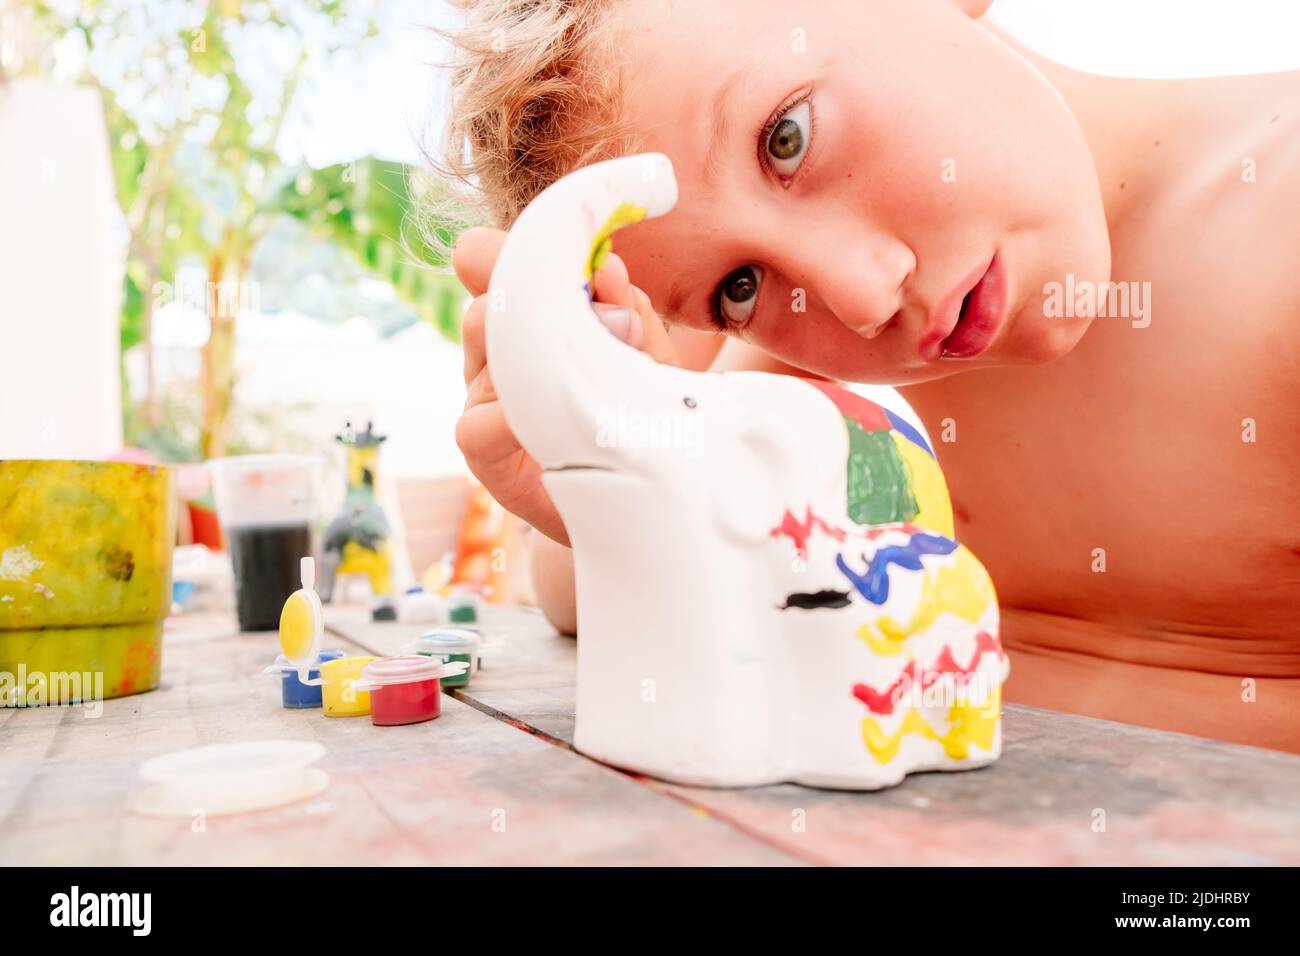 In summer the children's creative activities help to entertain themselves by developing artistic creativity. Stock Photo